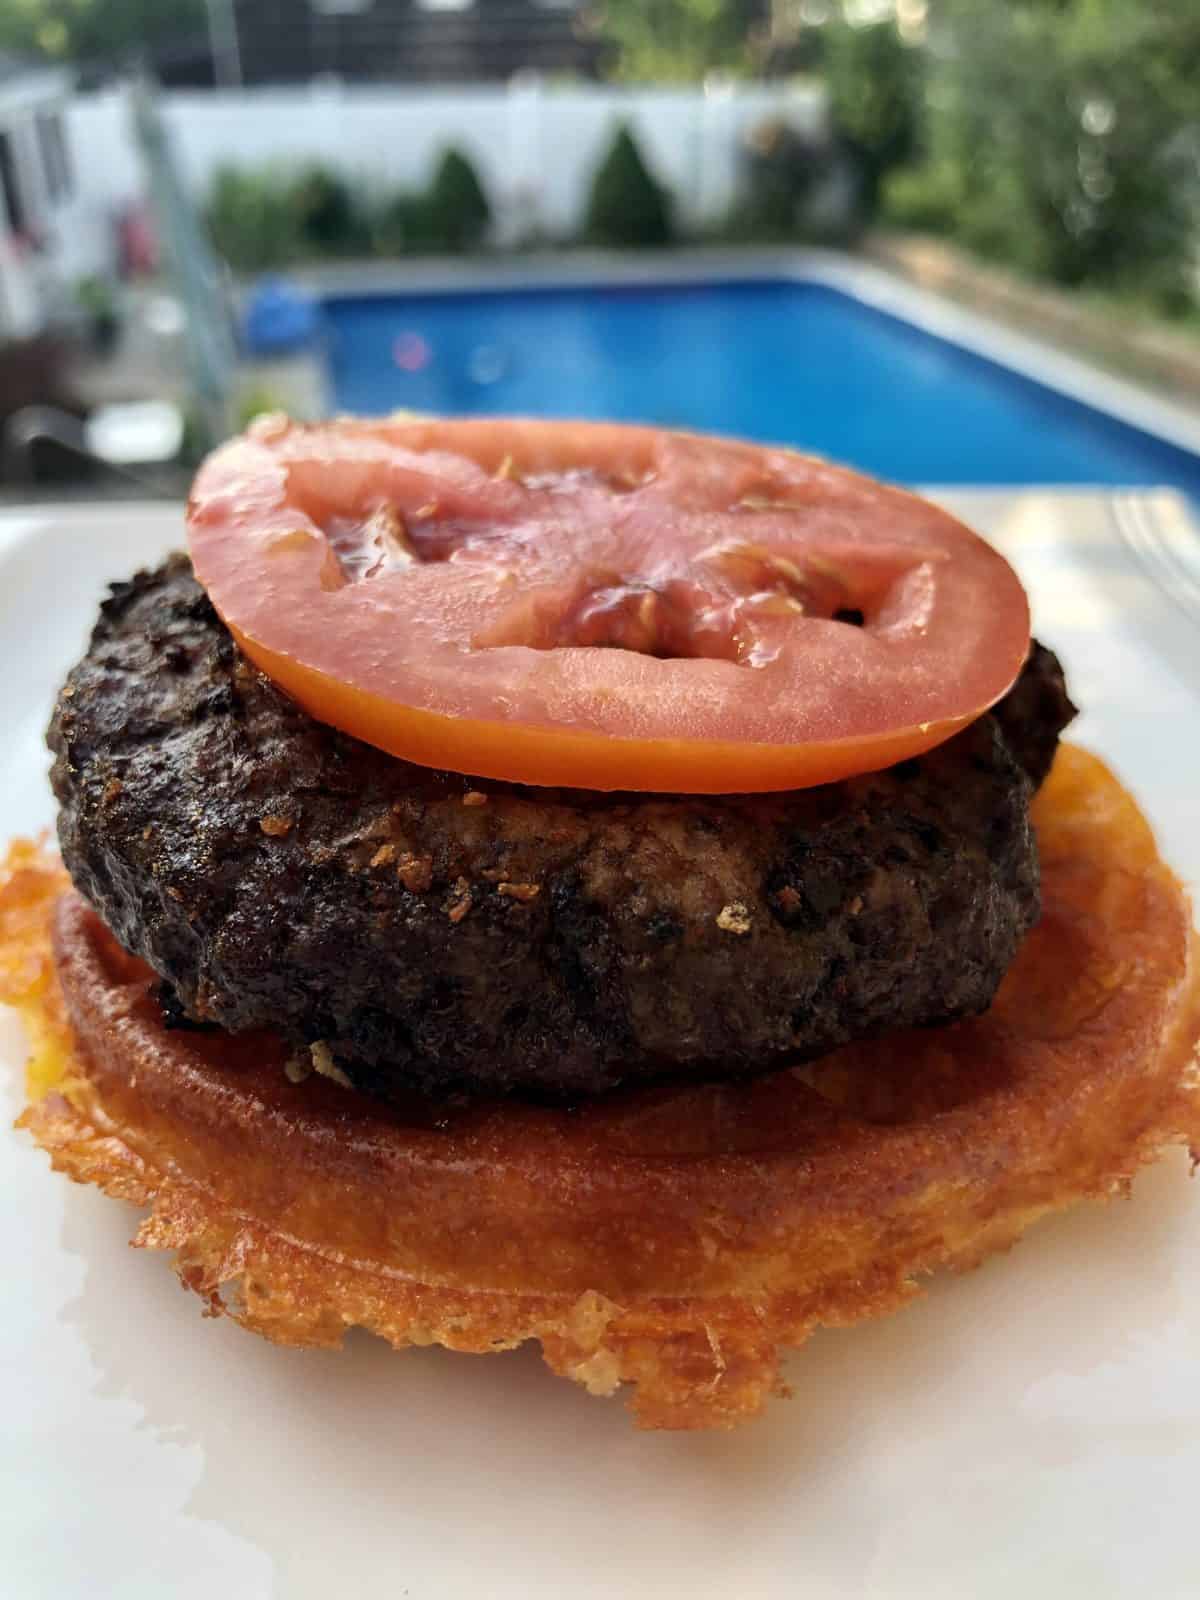 Chaffle Burger with a slice of tomato on top in front of an unground pool